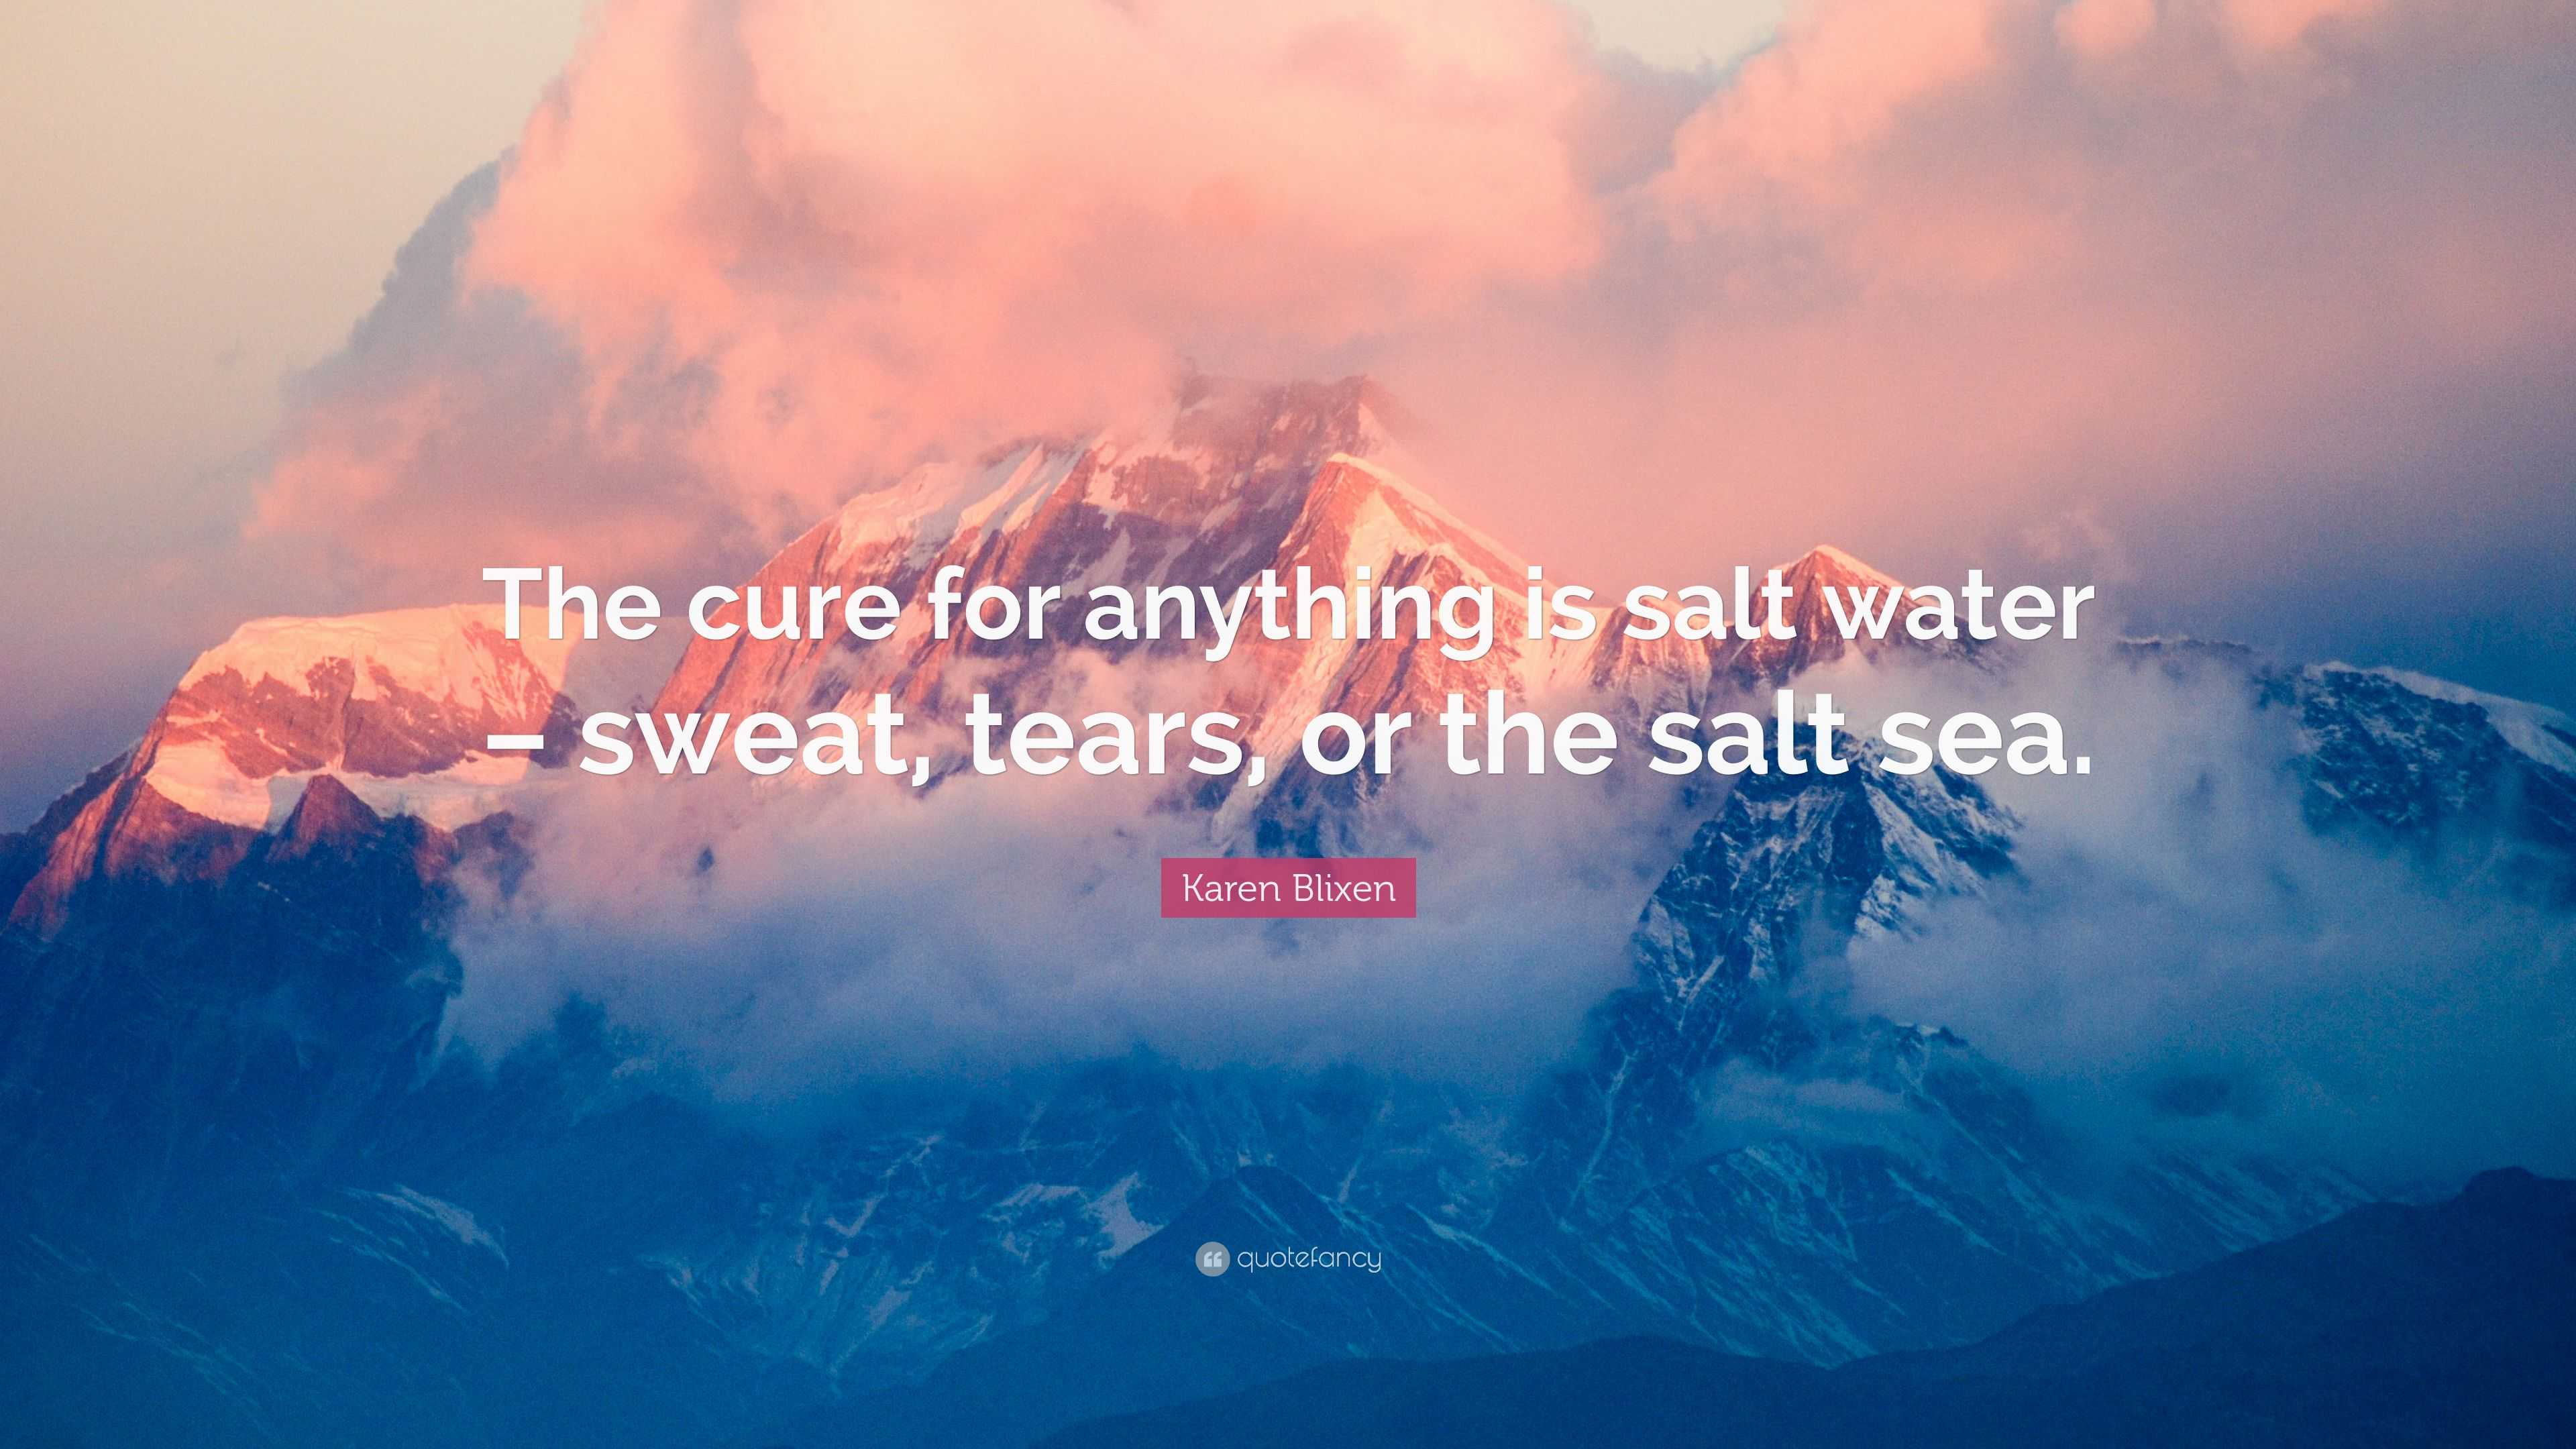 Karen Blixen Quote: "The cure for anything is salt water - sweat, tears, or the salt sea." (9 ...